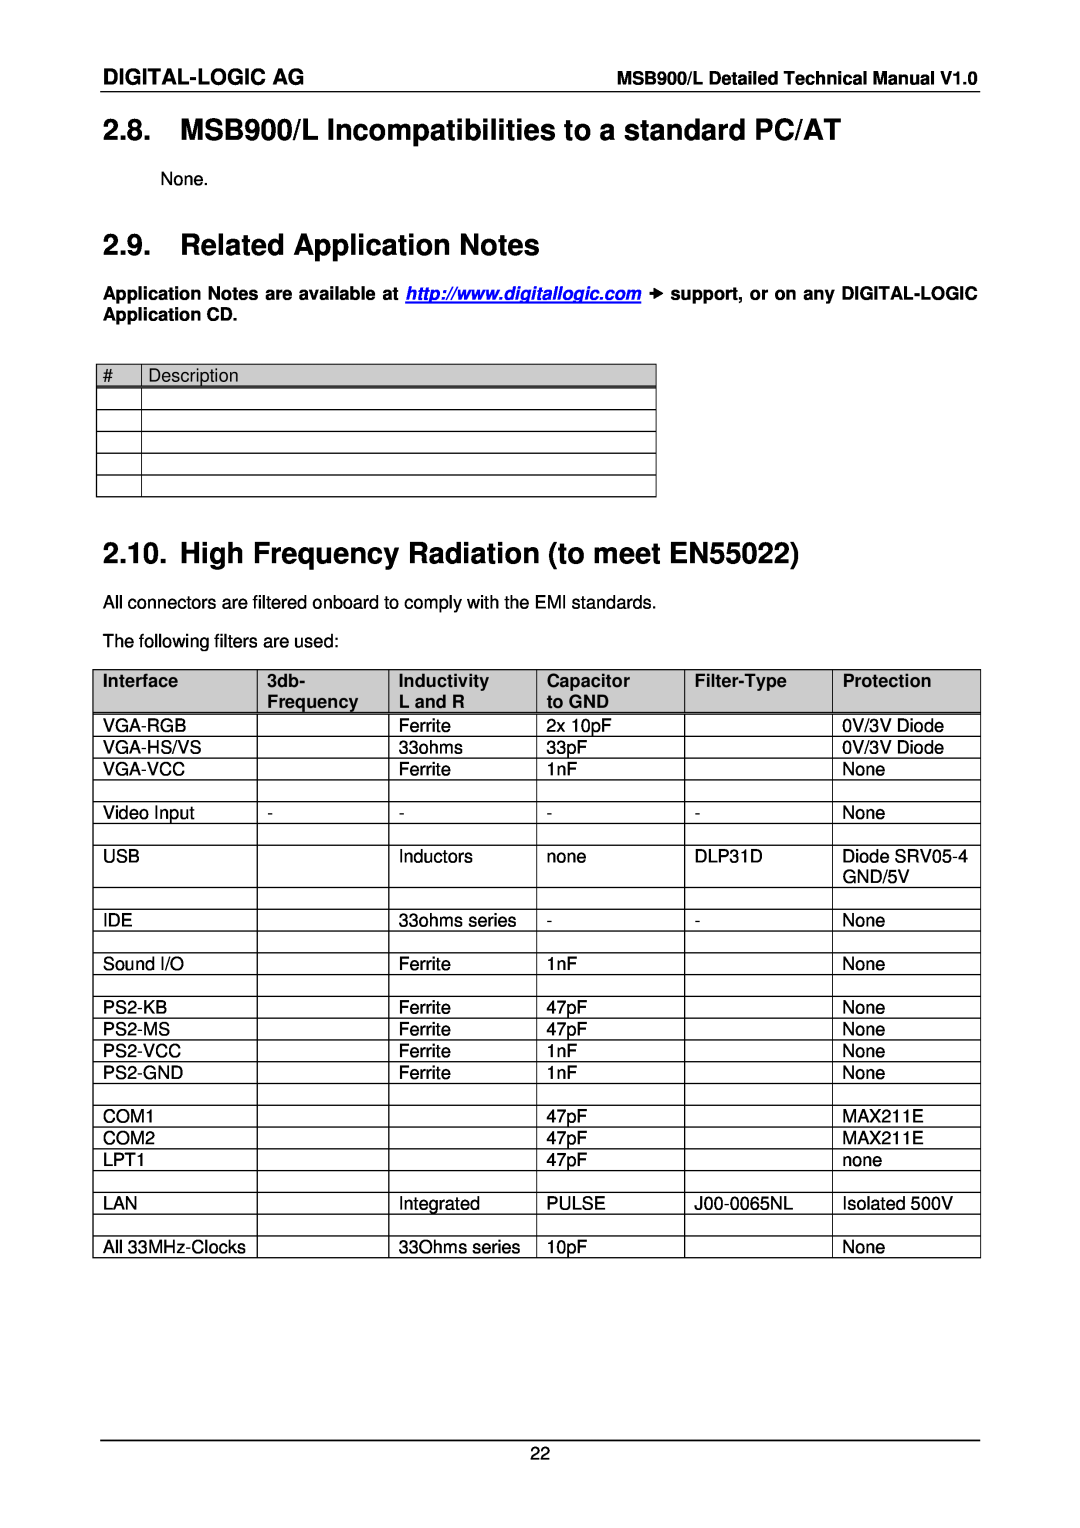 Compaq MSB900L user manual MSB900/L Incompatibilities to a standard PC/AT, Related Application Notes, Digital-Logic Ag 